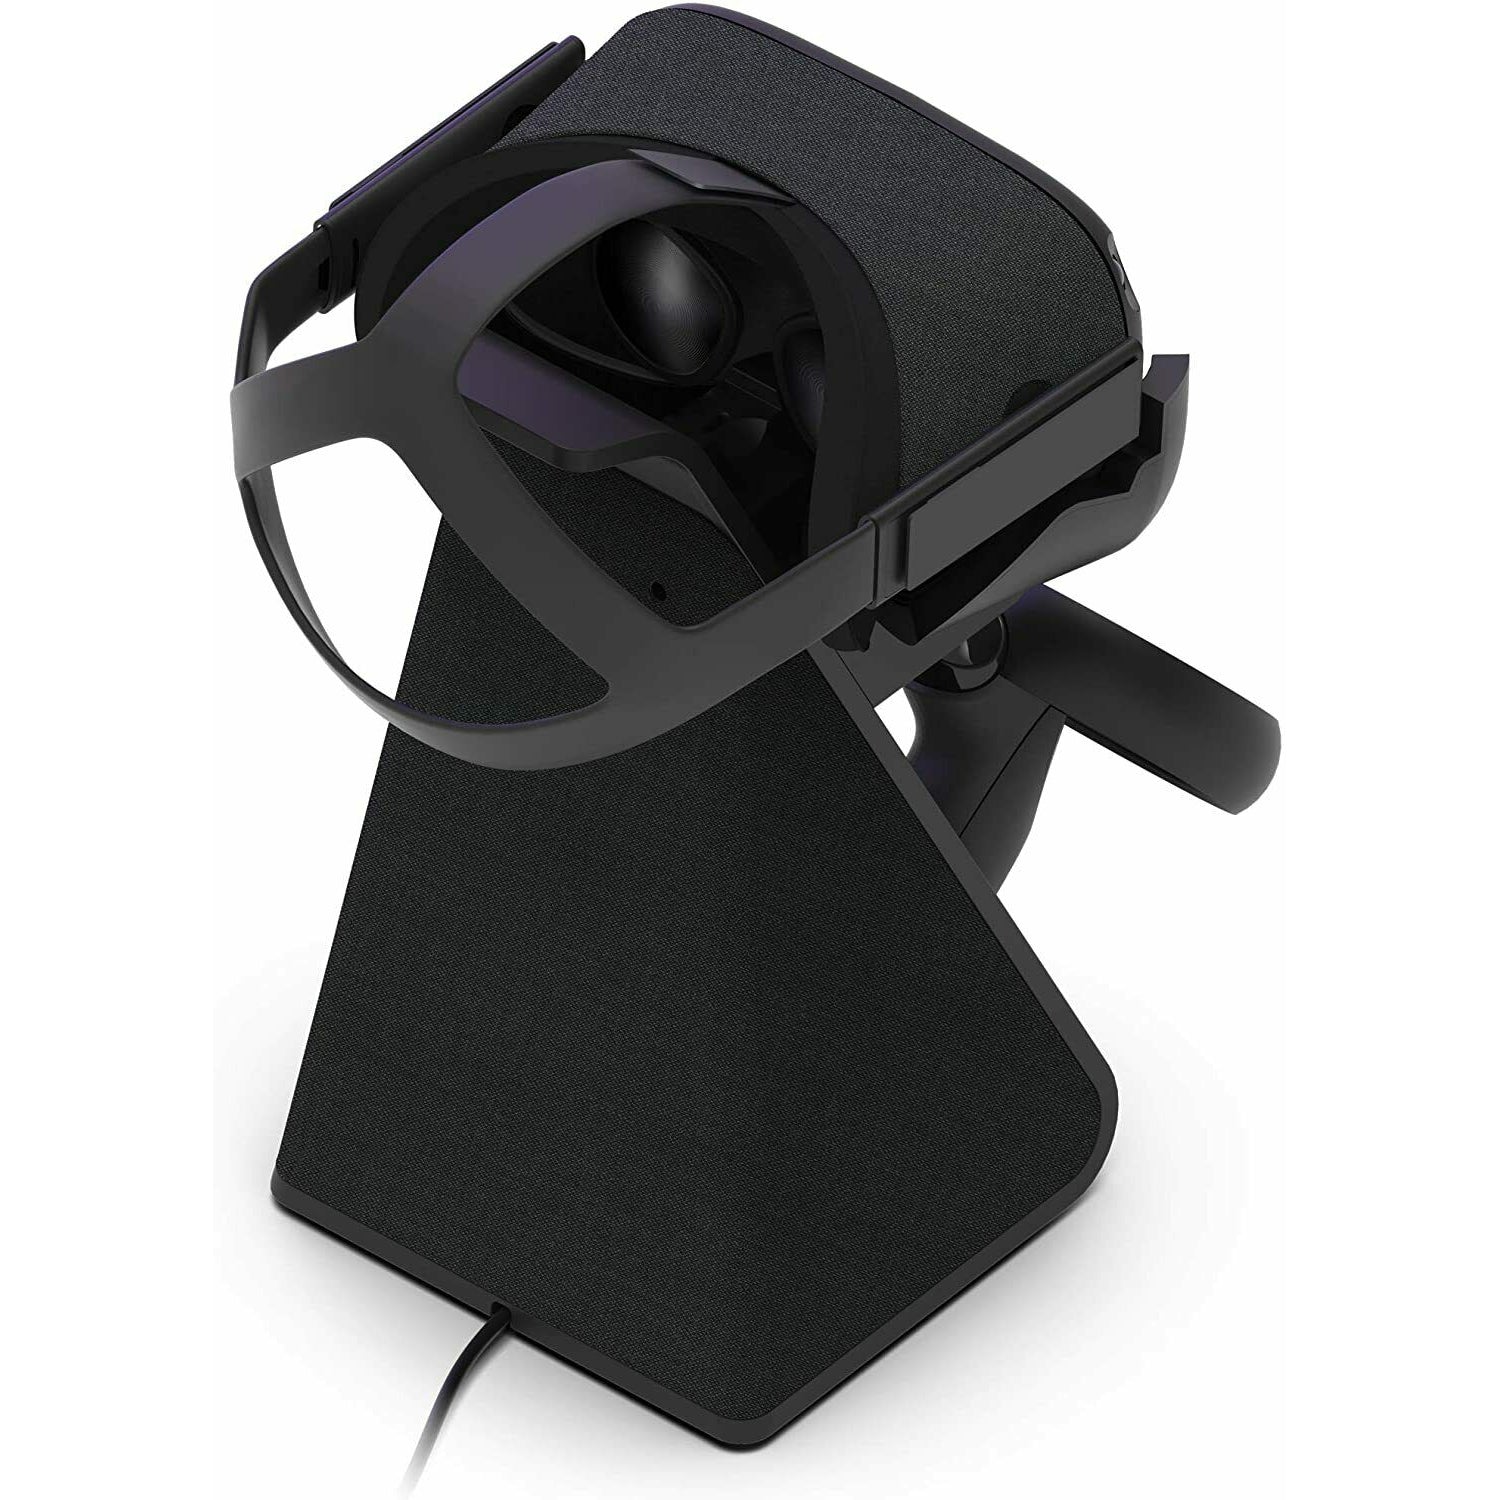 Dazed Charge Dock for Oculus Quest, DZ-OQP001-DOC, Black